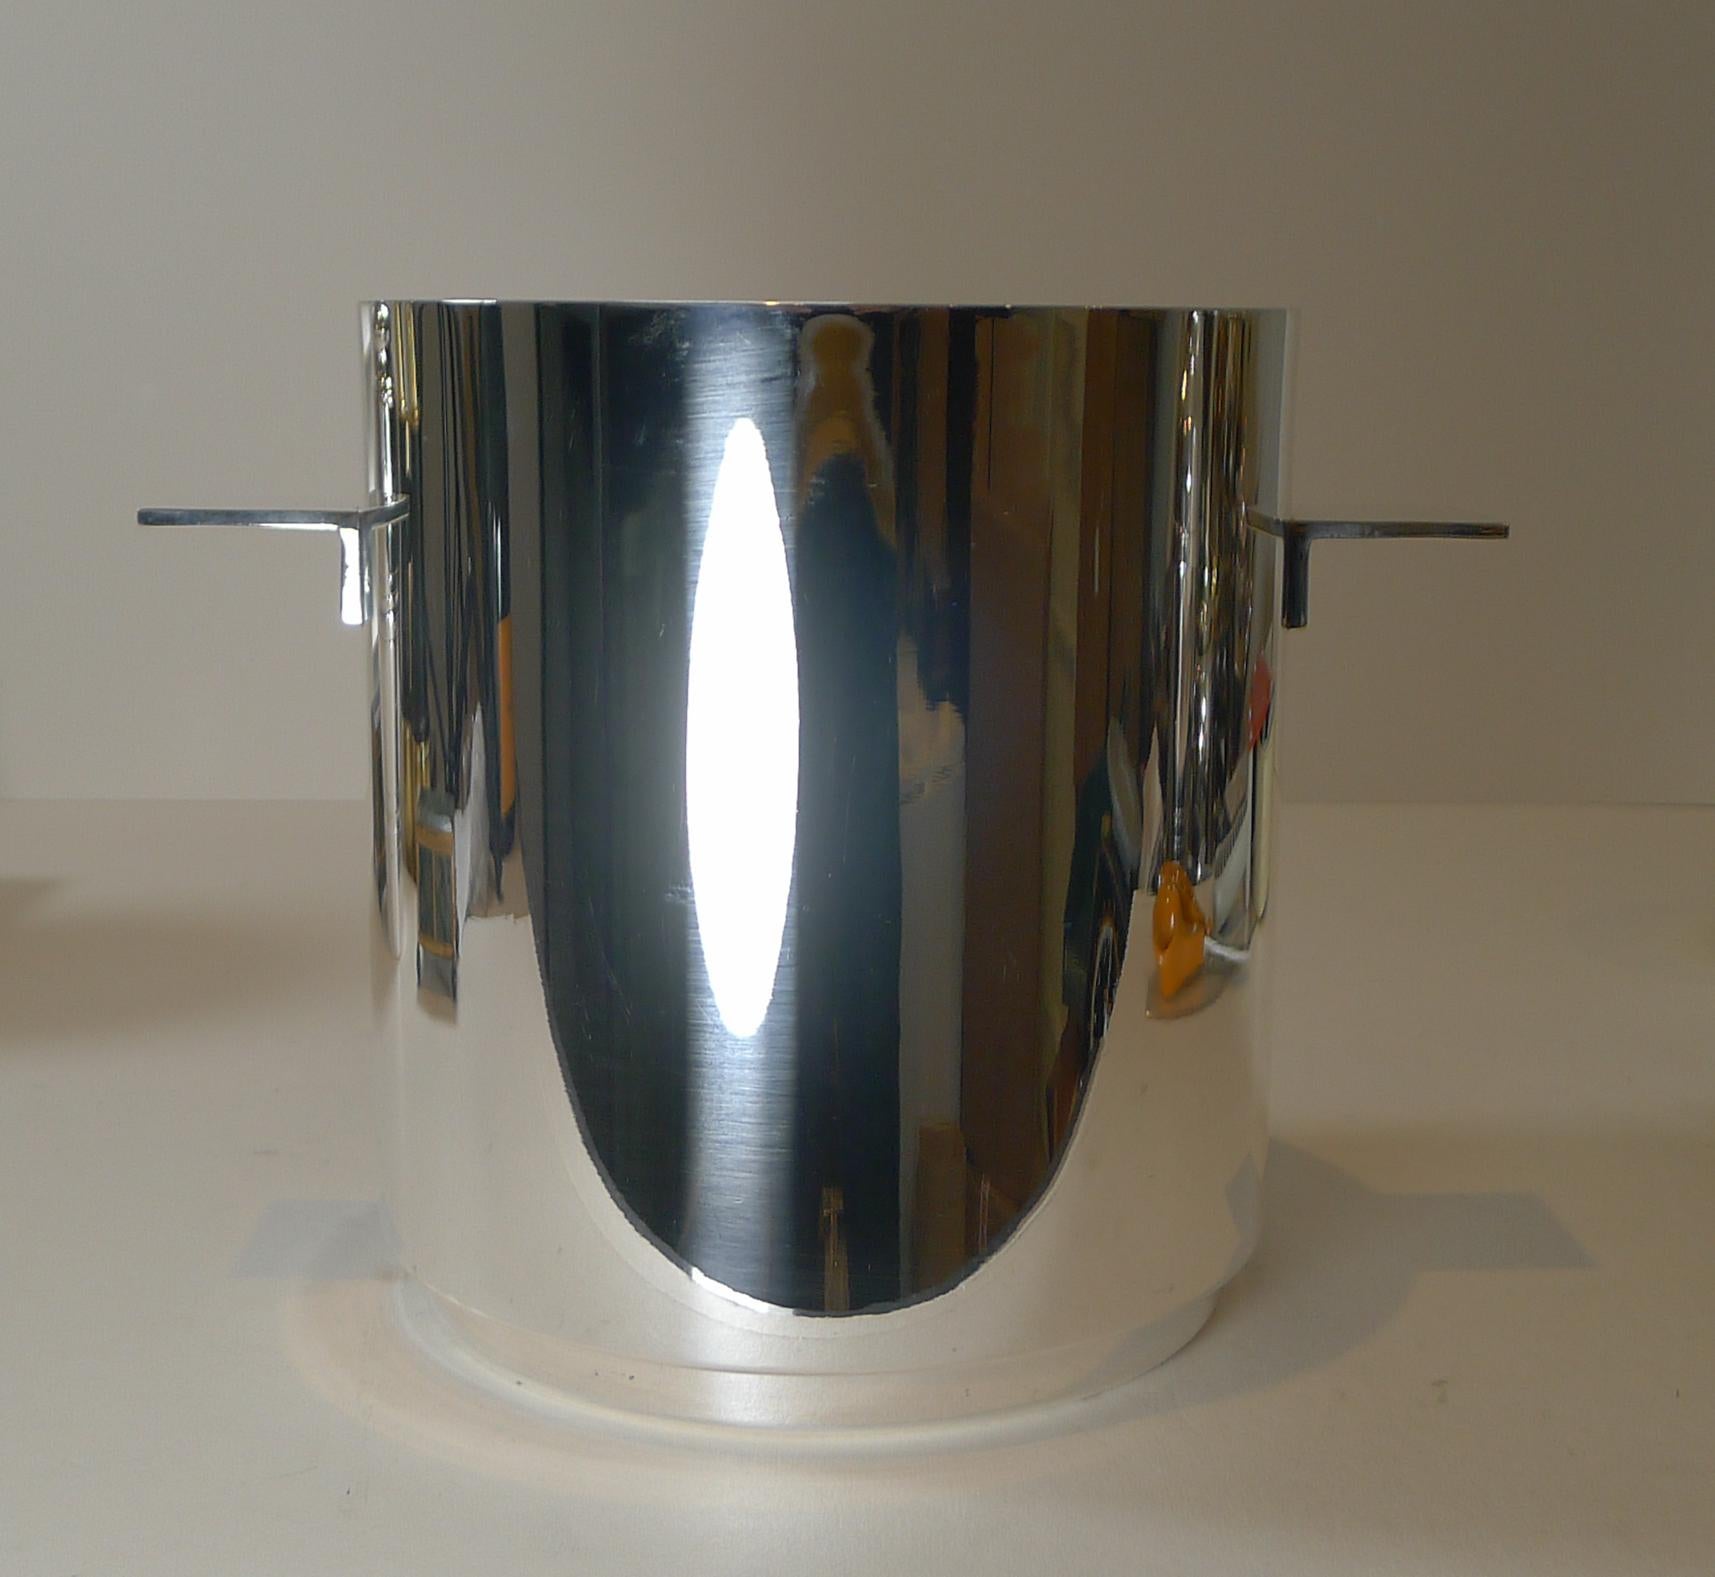 A magnificent, stylish and Modernist silver plated Champagne bucket designed by the world famous Lino Sabatinni, the preeminent figure in modern Italian silver and metalware design.

The design was manufactured by the creme de la creme of French